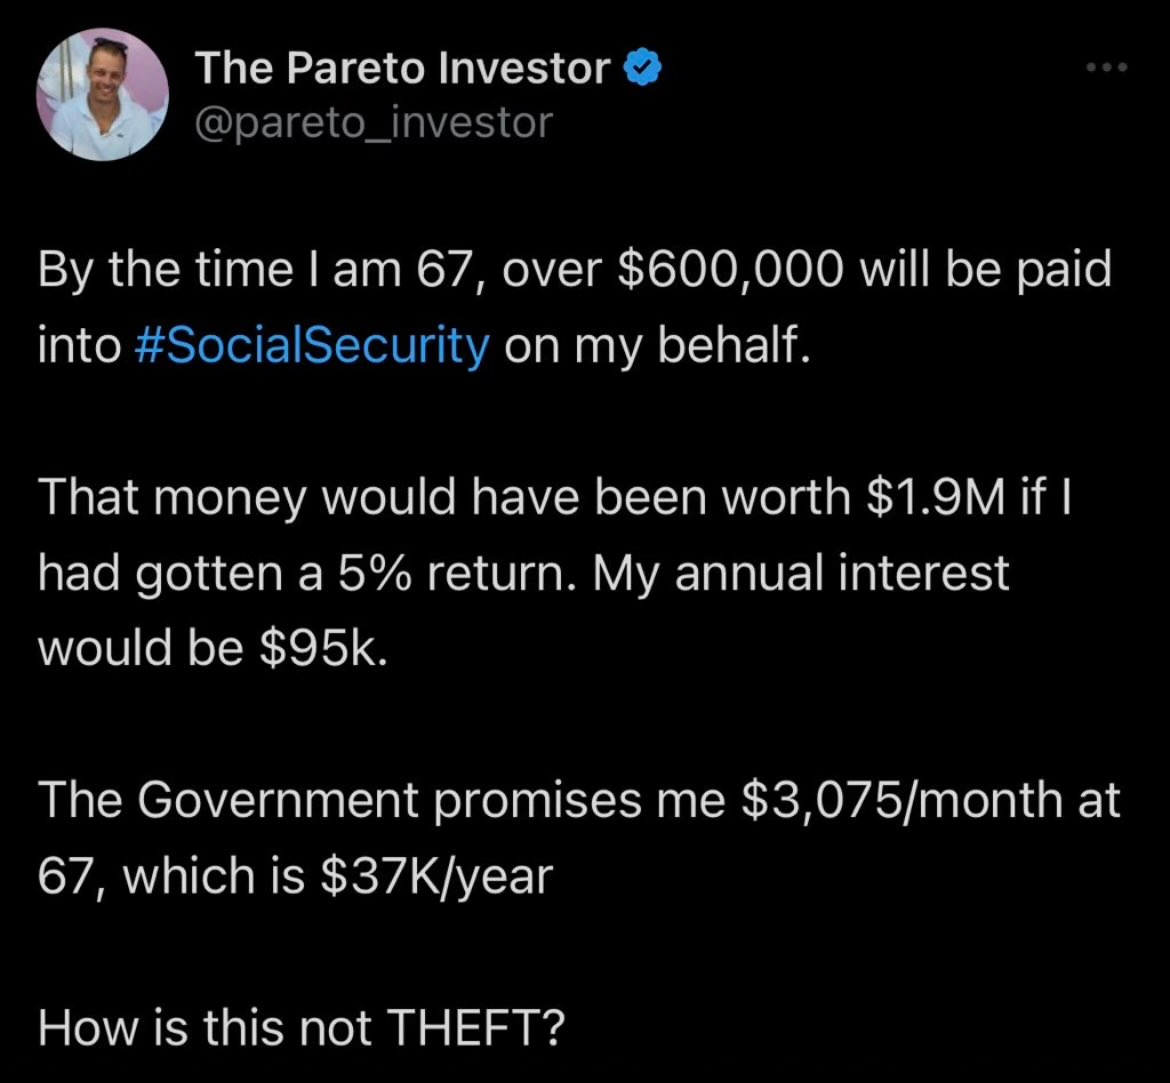 How is this not theft?